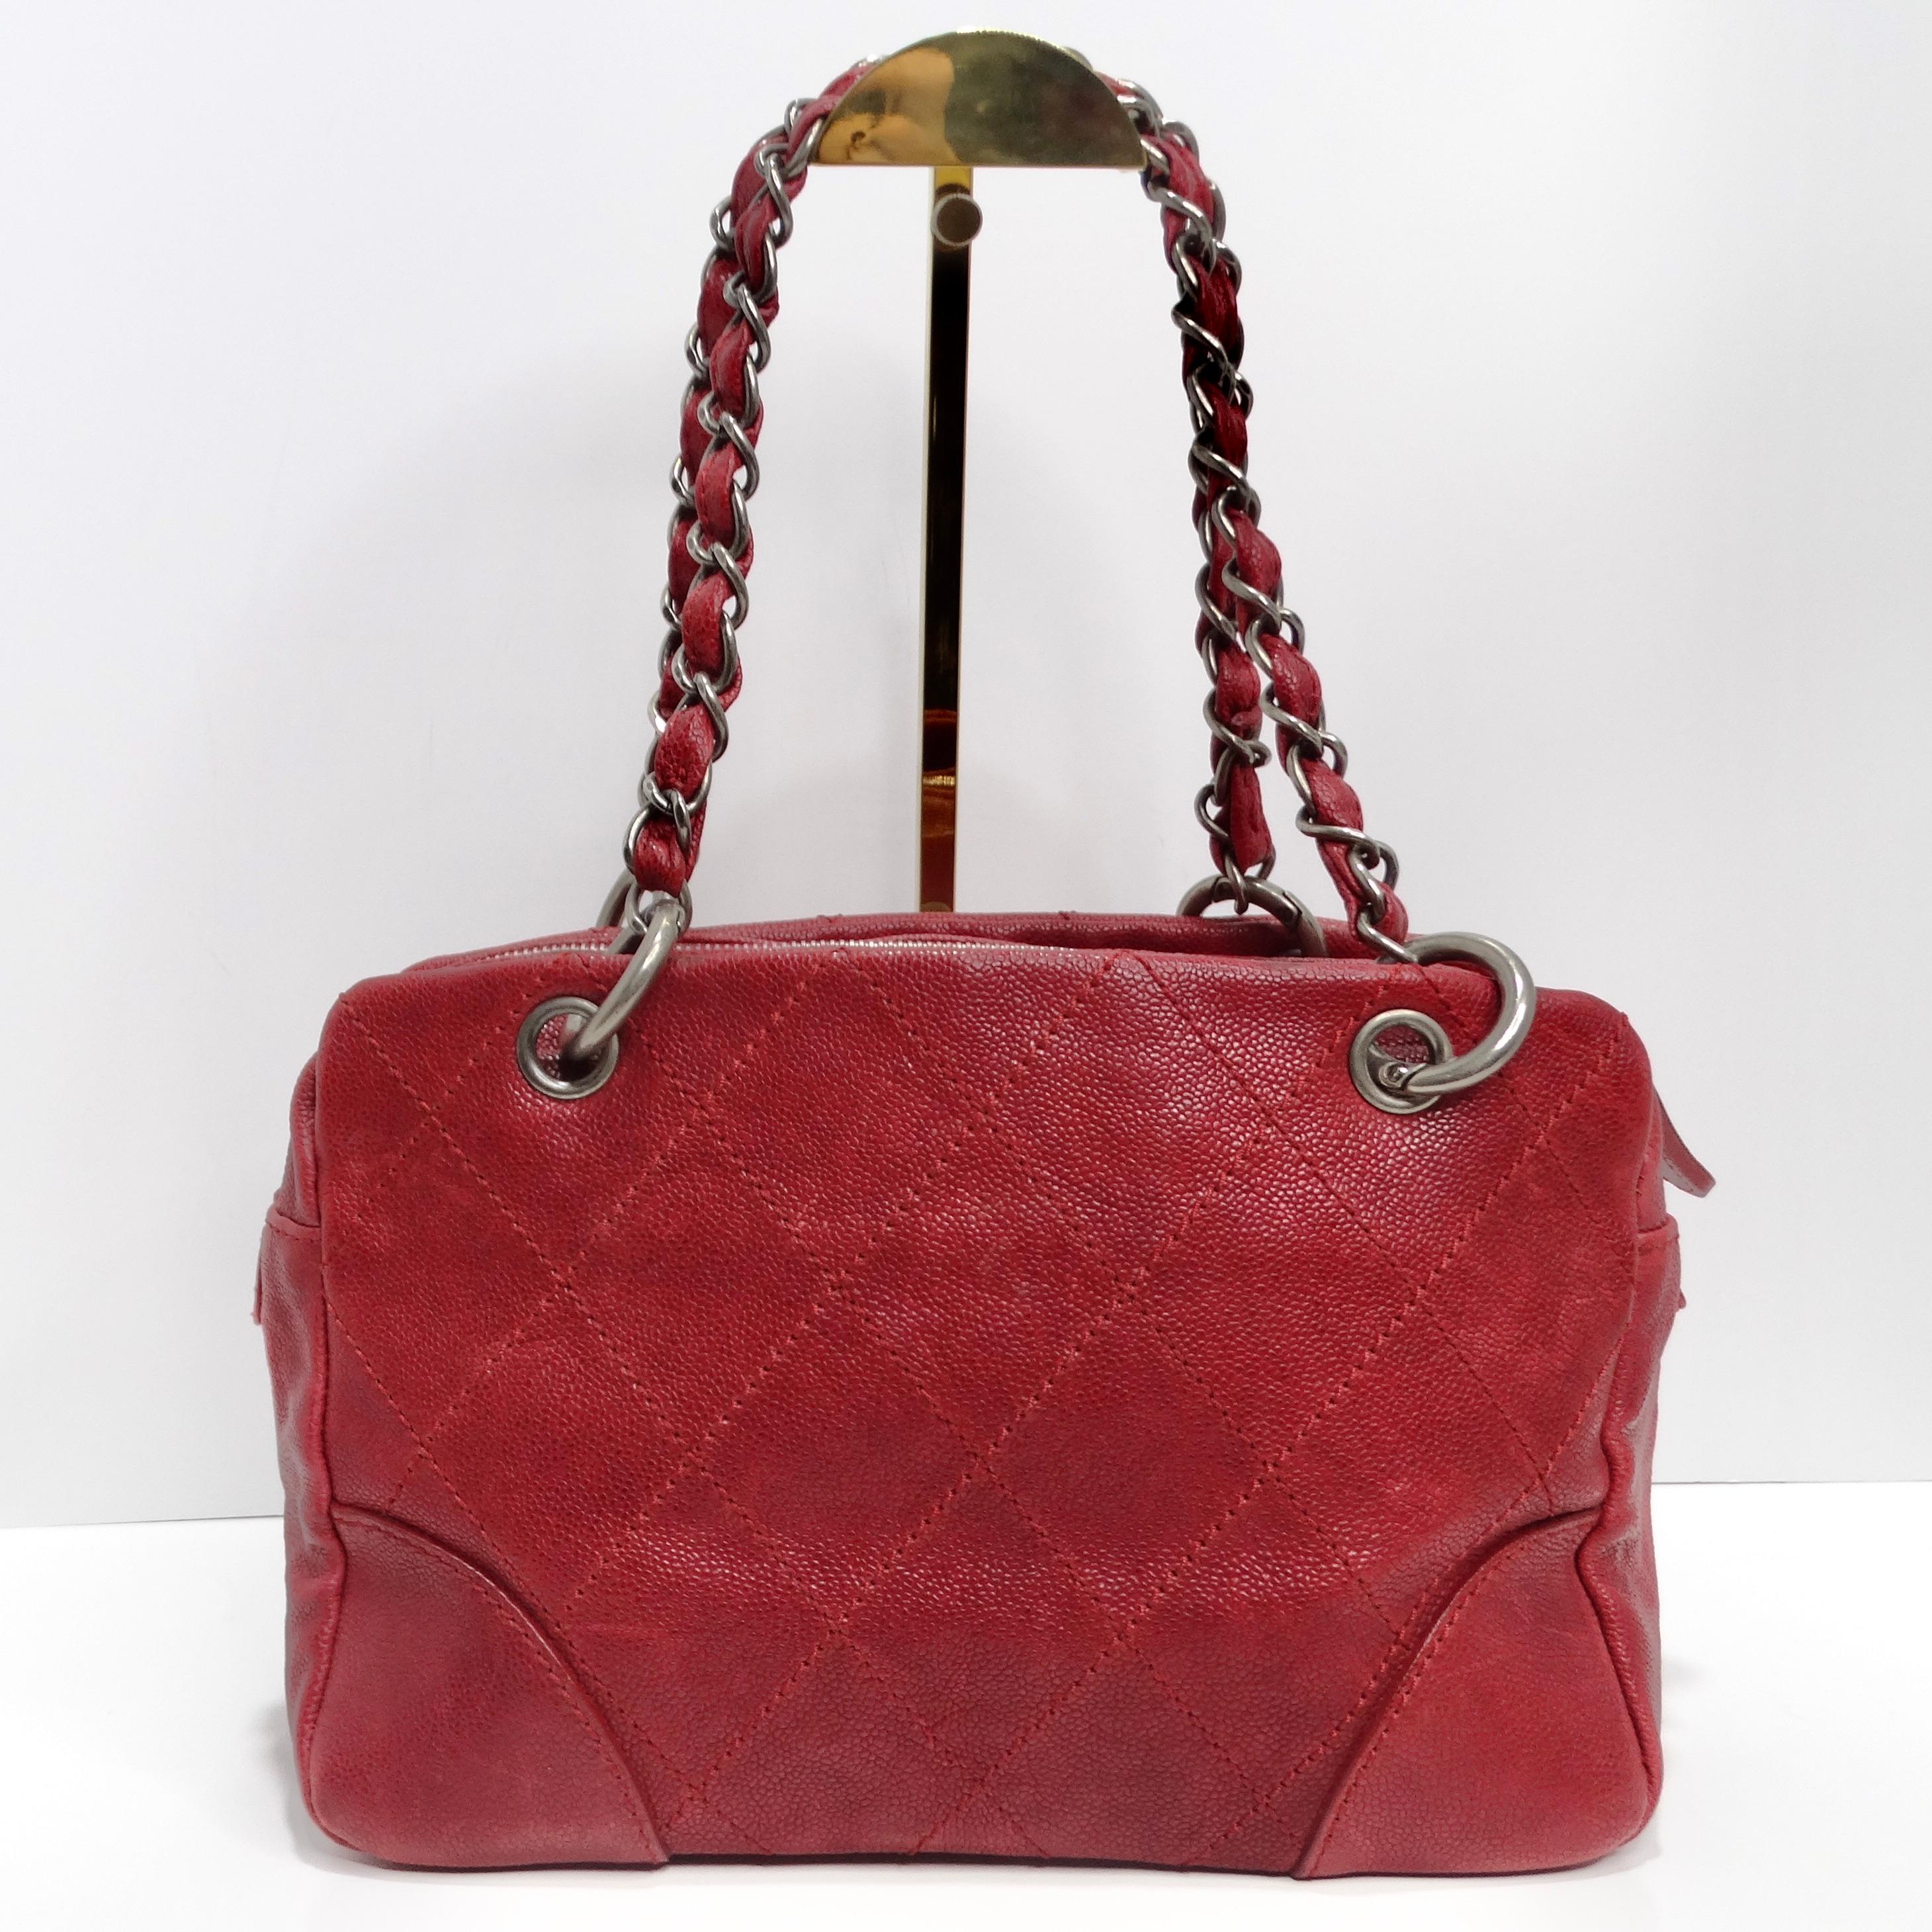 Chanel Quilted Caviar Red Leather Shoulder Bag In Excellent Condition For Sale In Scottsdale, AZ